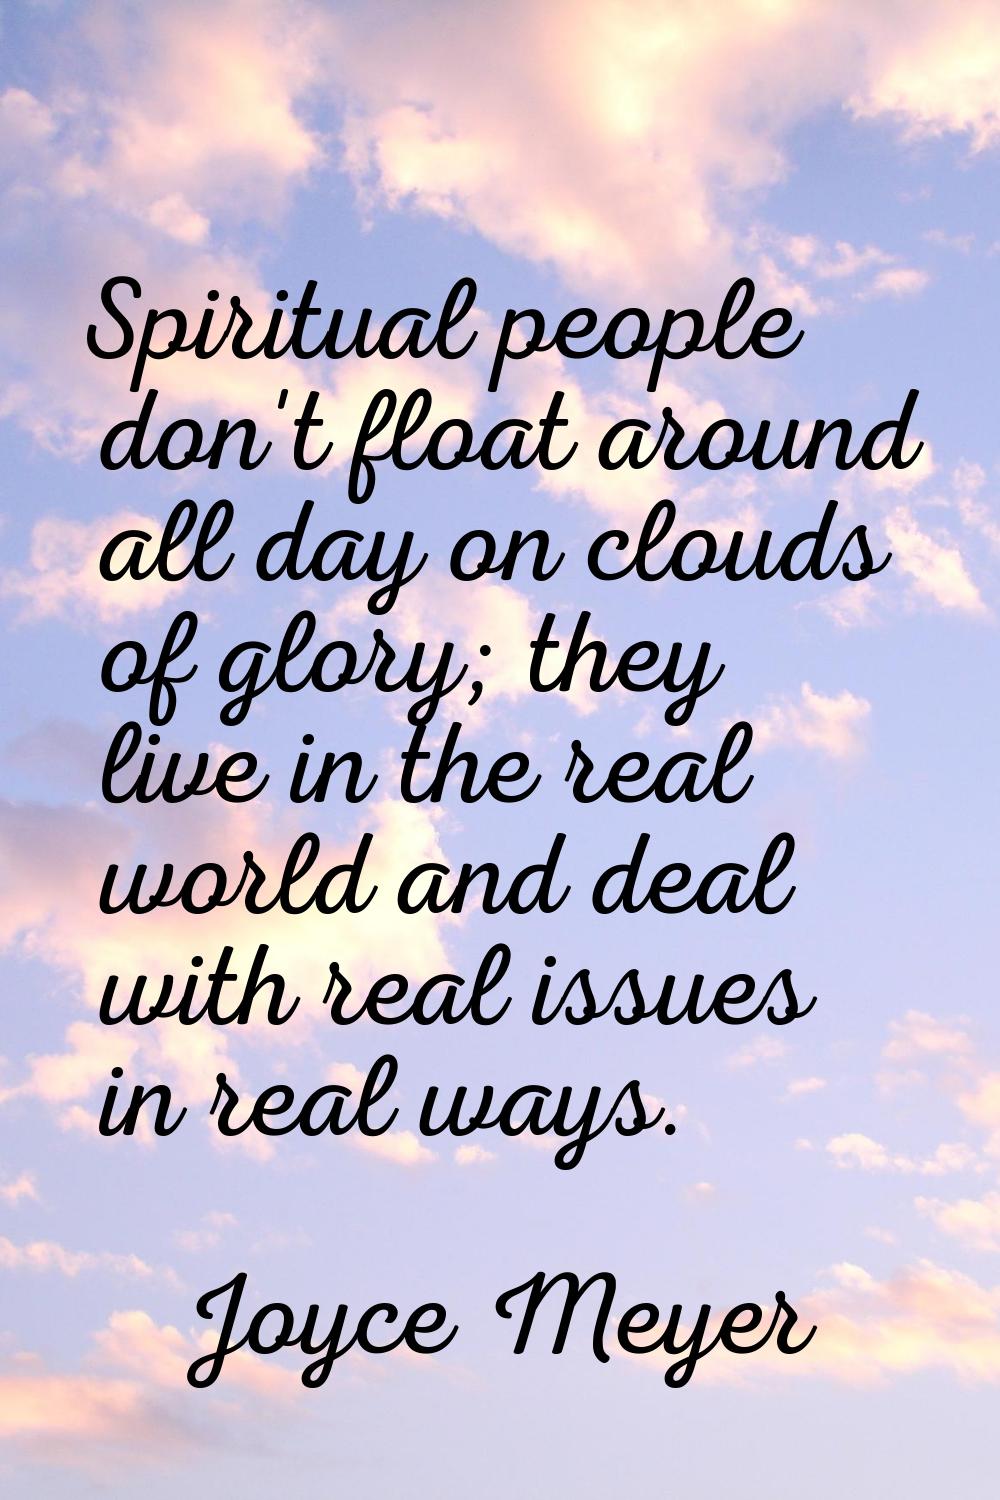 Spiritual people don't float around all day on clouds of glory; they live in the real world and dea